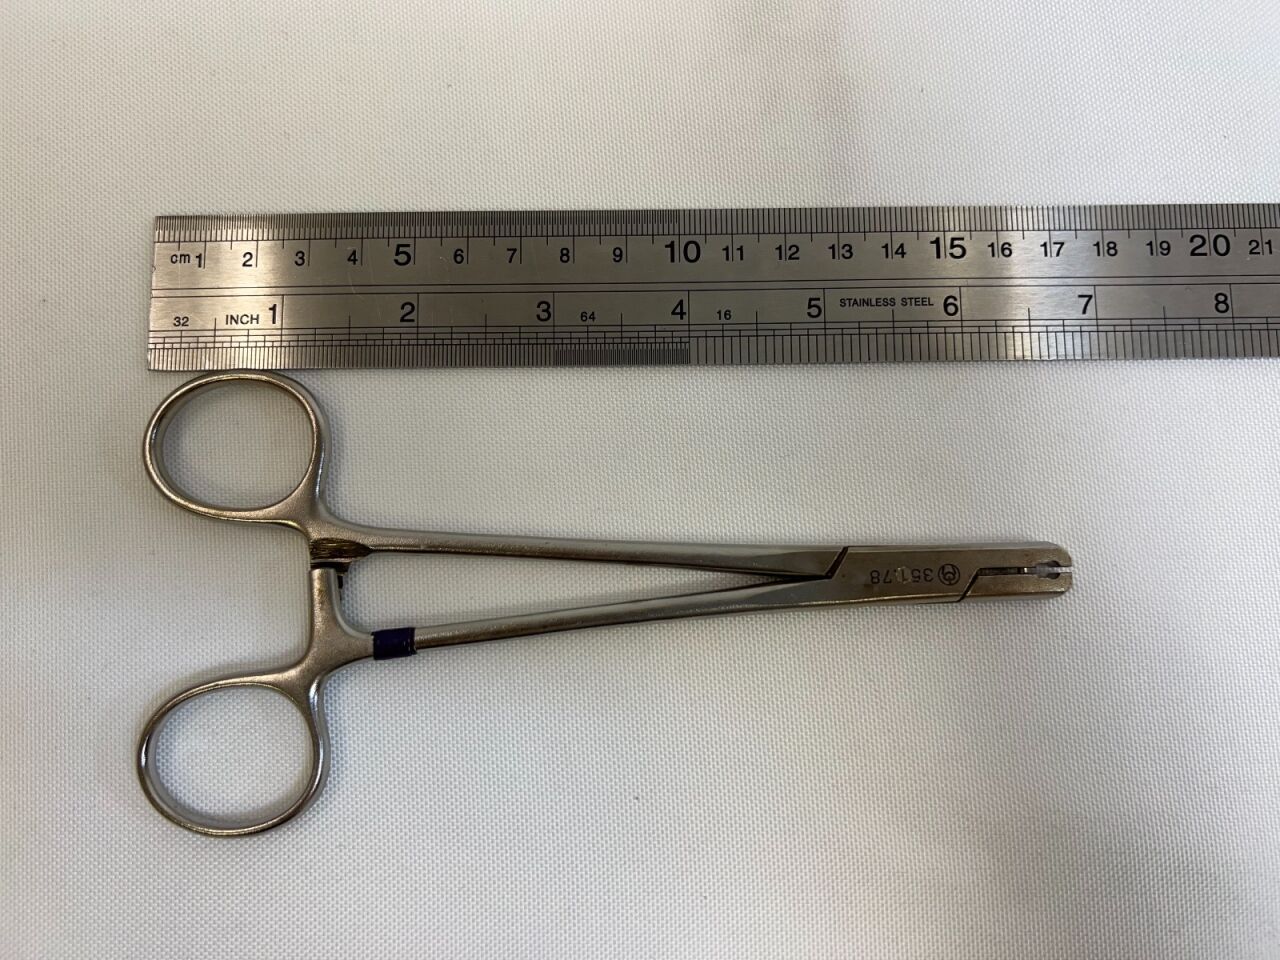 351.78 Holding Forceps 6mm Jaw for Reaming Rods US342